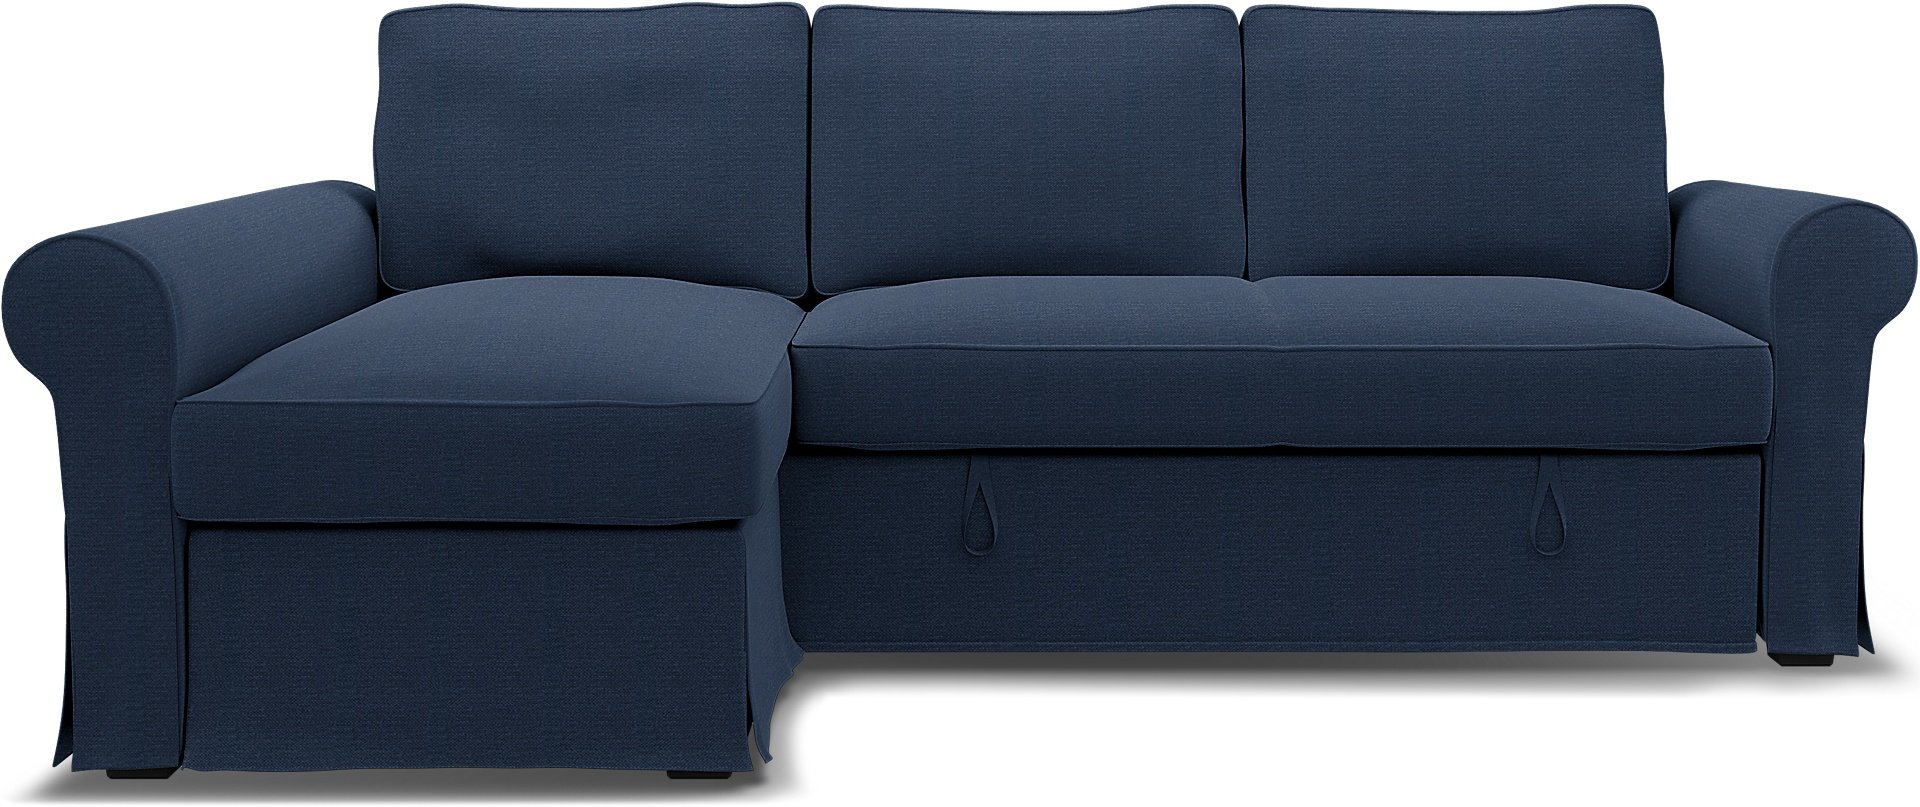 IKEA - Backabro Sofabed with Chaise Cover, Navy Blue, Linen - Bemz